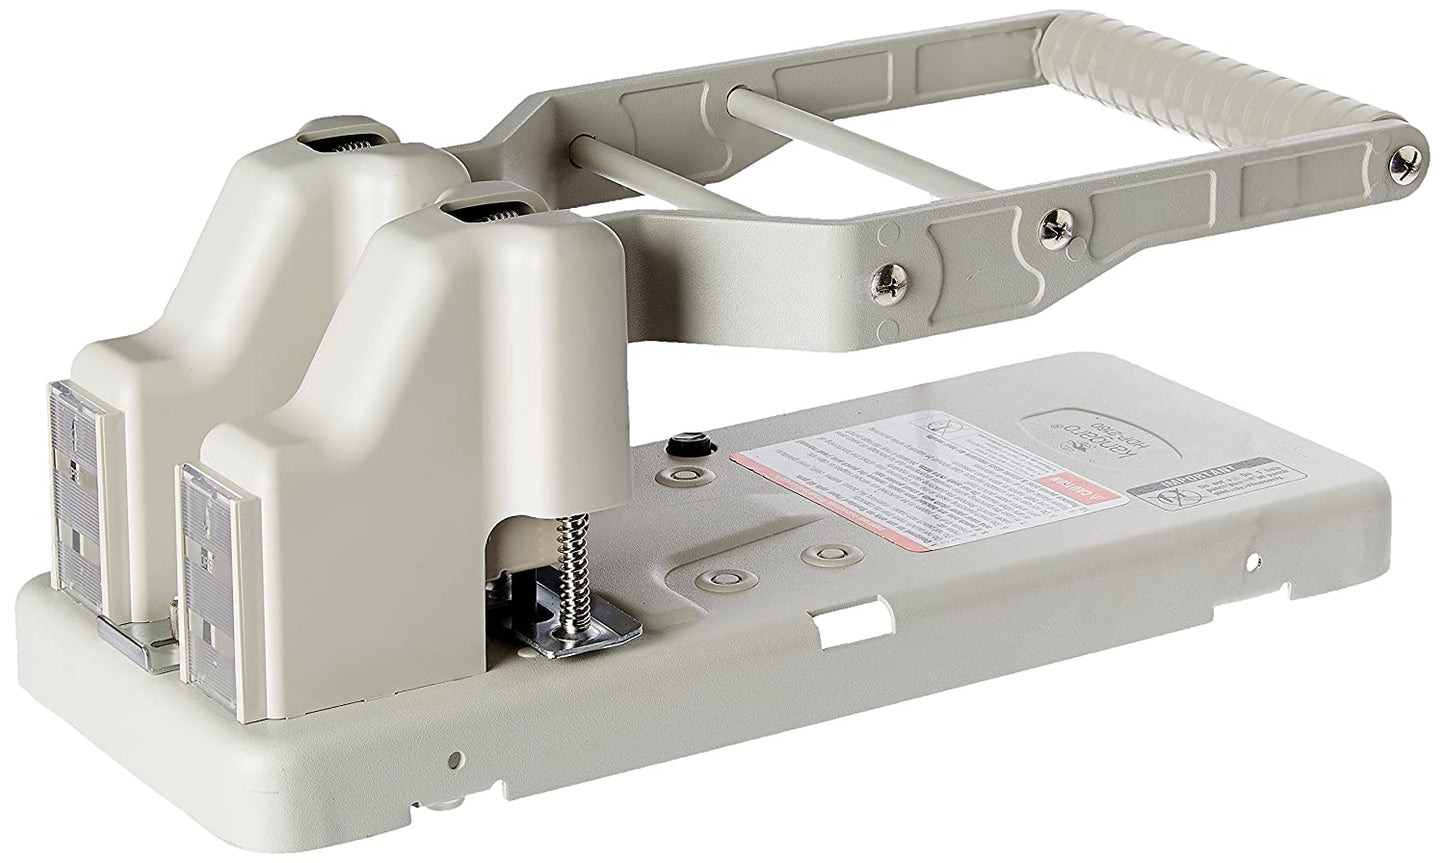 Kangaro Desk Essentials HDP-2160 2 Hole Heavy Duty Metal Paper Punch - Color May Vary